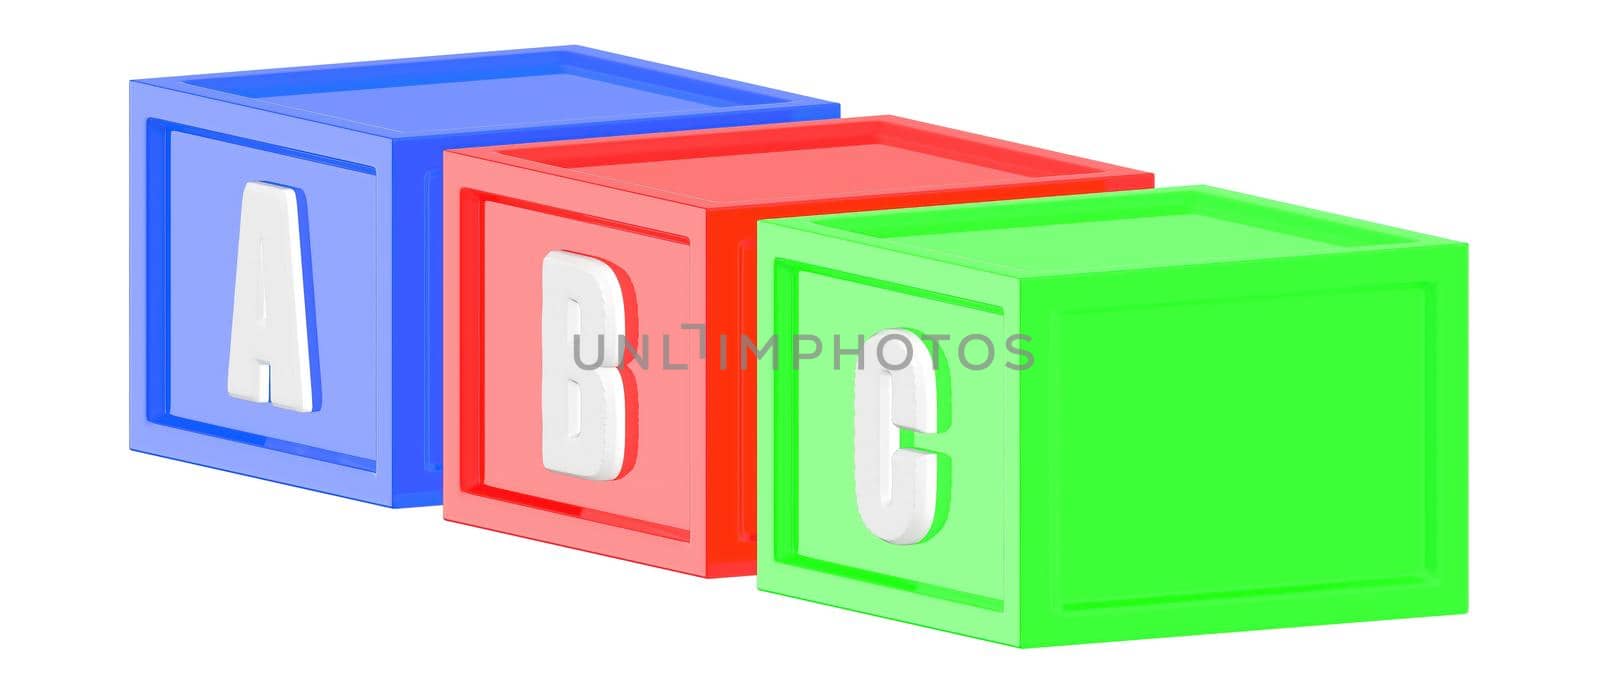 3d blue red green color cubes with a b c in it respectively by qualityrender